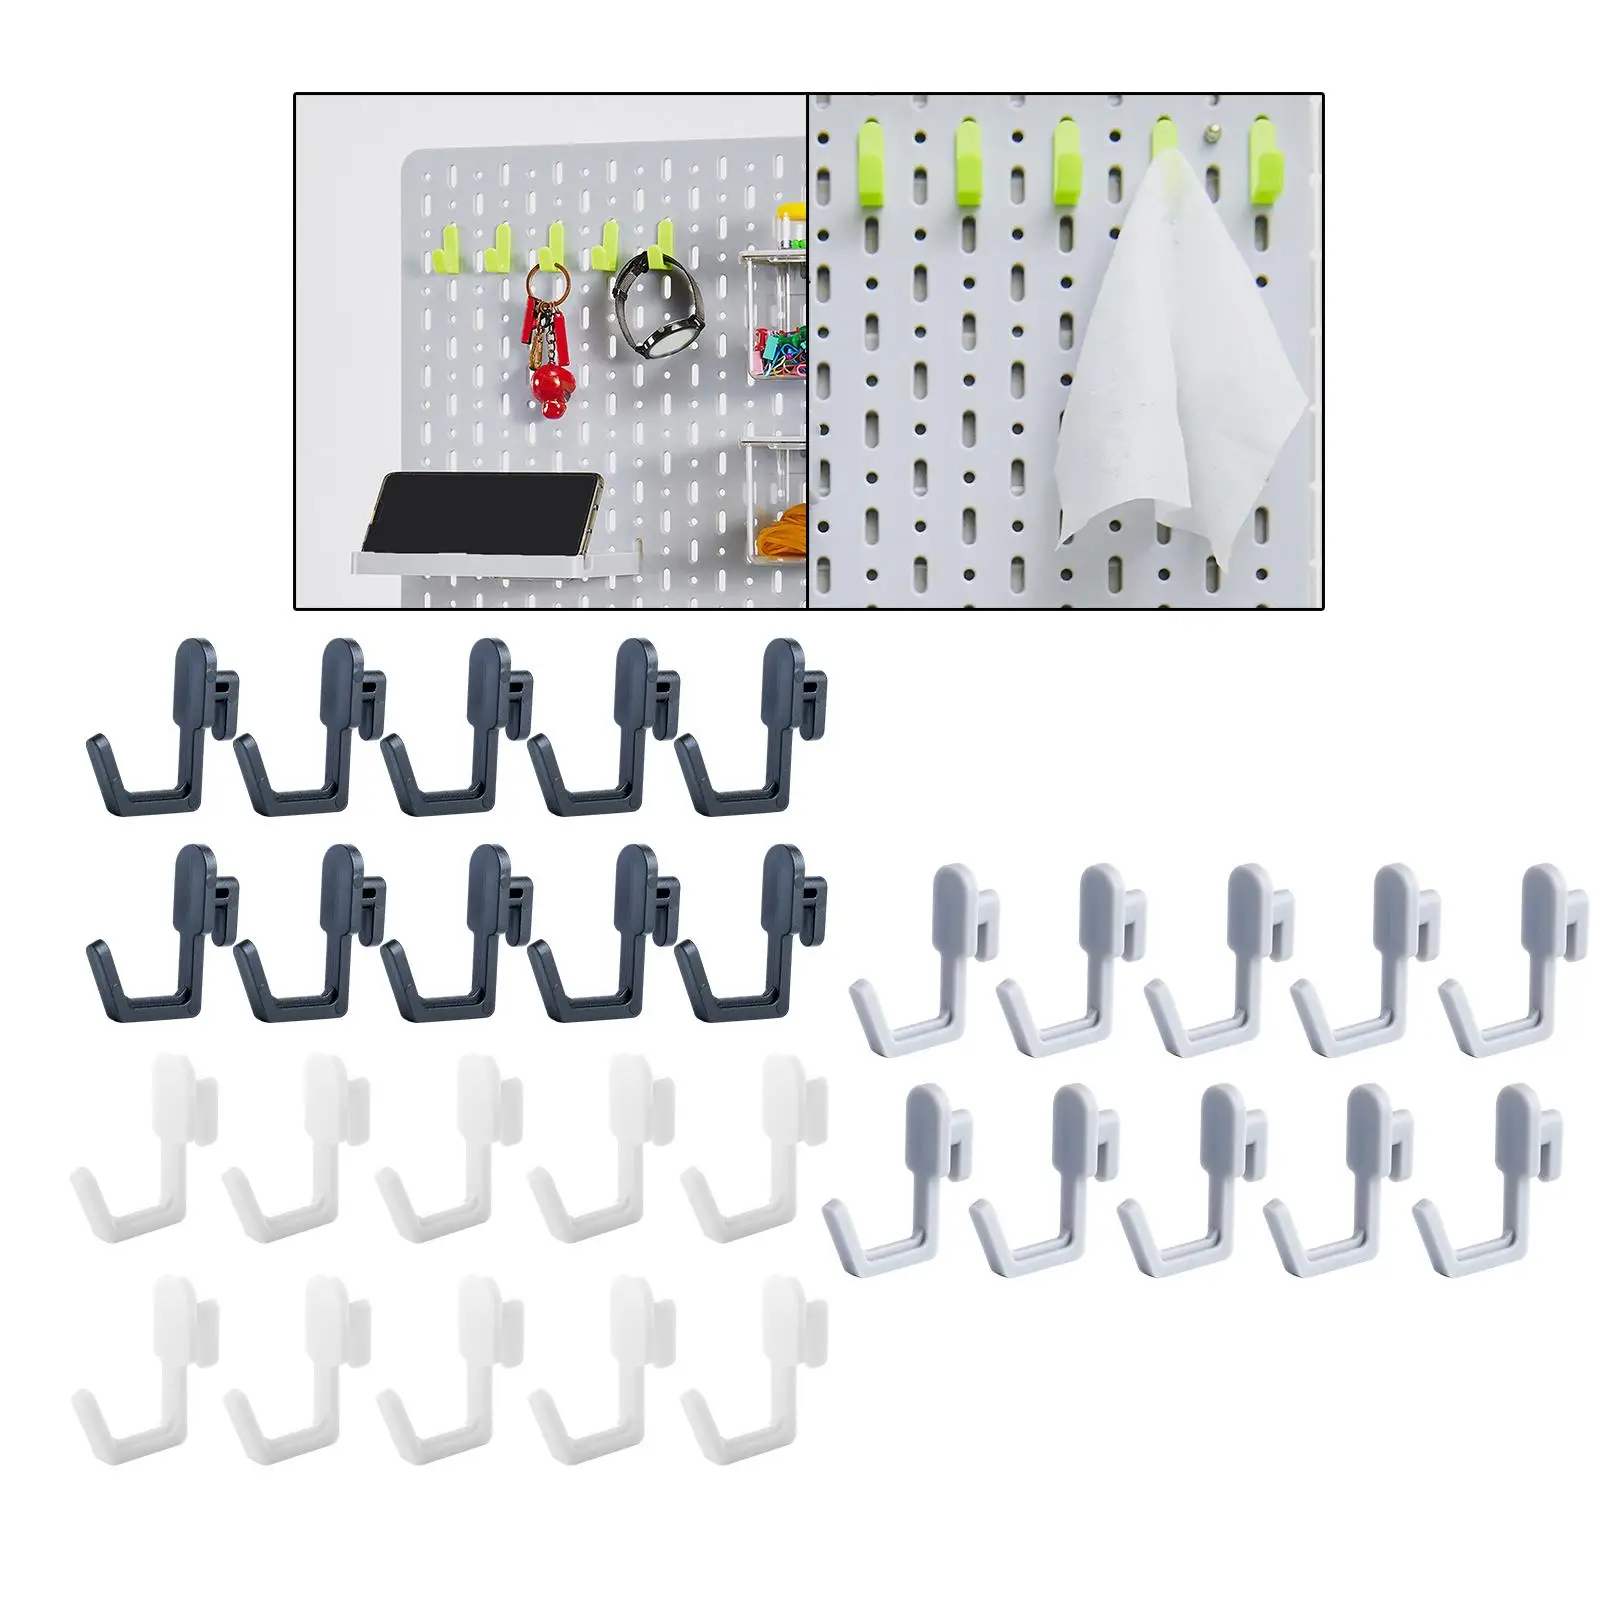 20 Pieces Pegboard Hook Wall Mounted Peg Hook Power Tool Holder Stable Practical for Home Workbench Basement Kitchen Storage